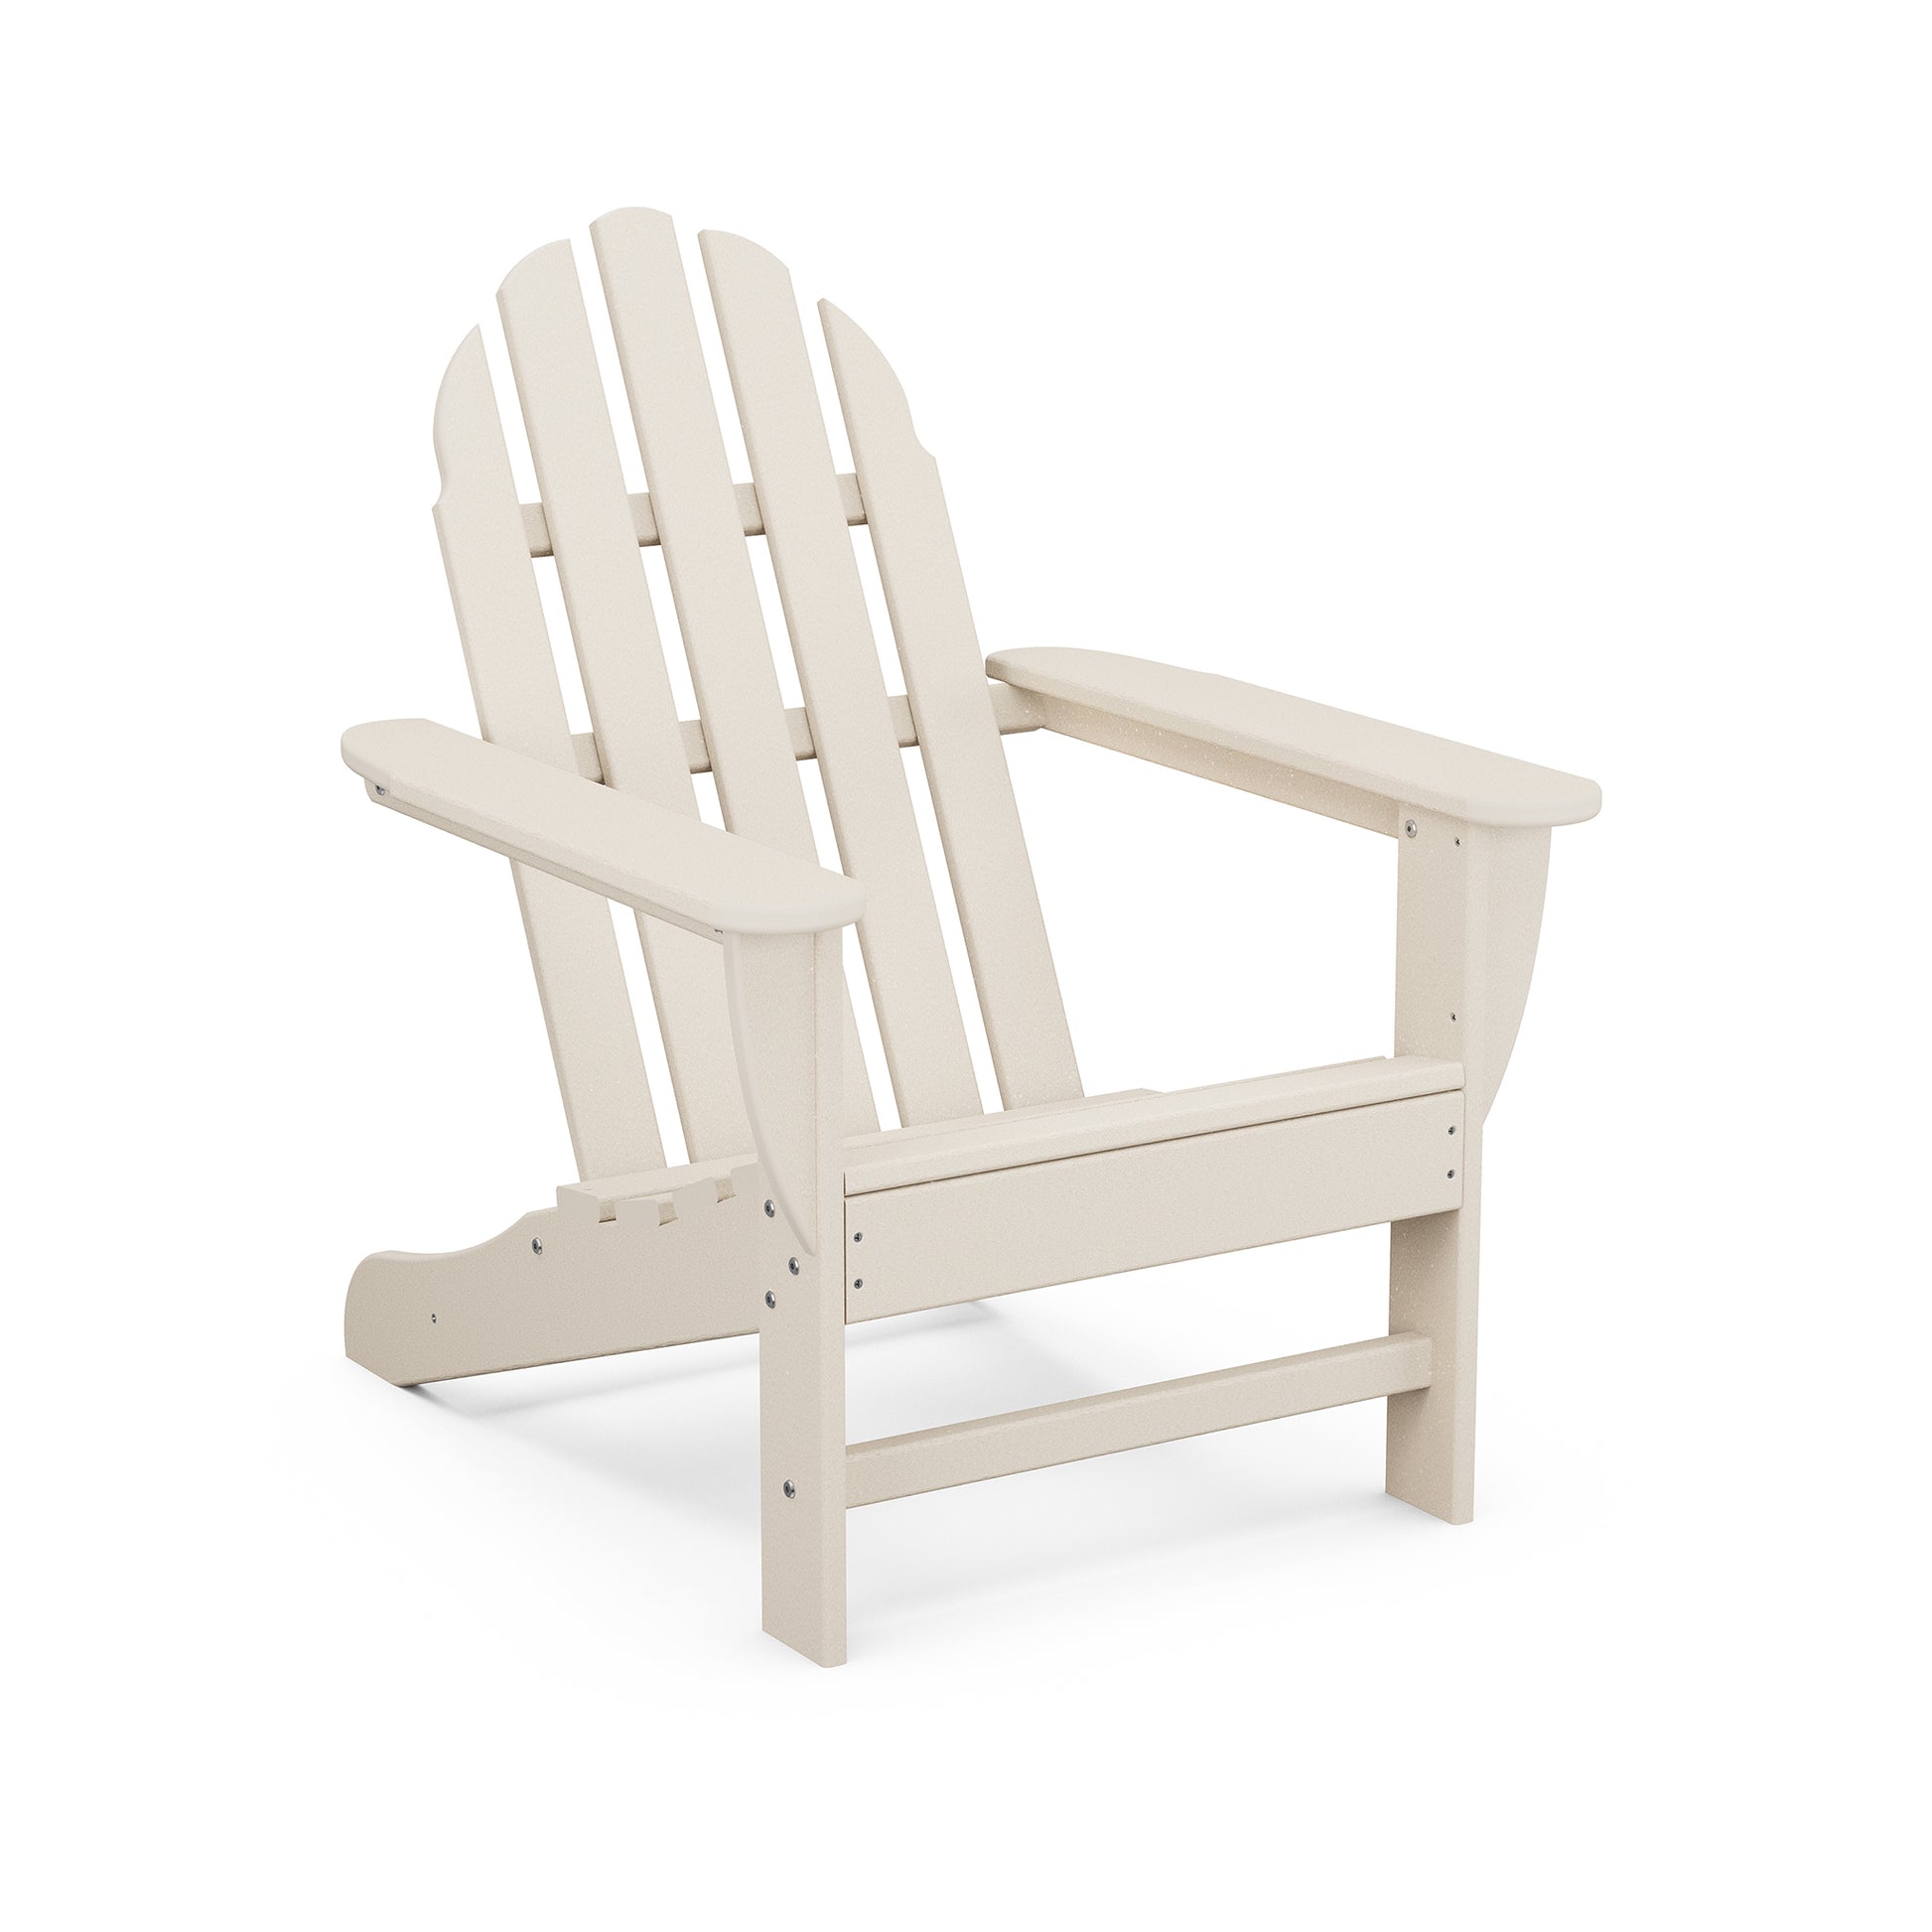 A beige POLYWOOD Classic Adirondack Chair, featuring a high back and wide armrests, displayed against a plain white background.